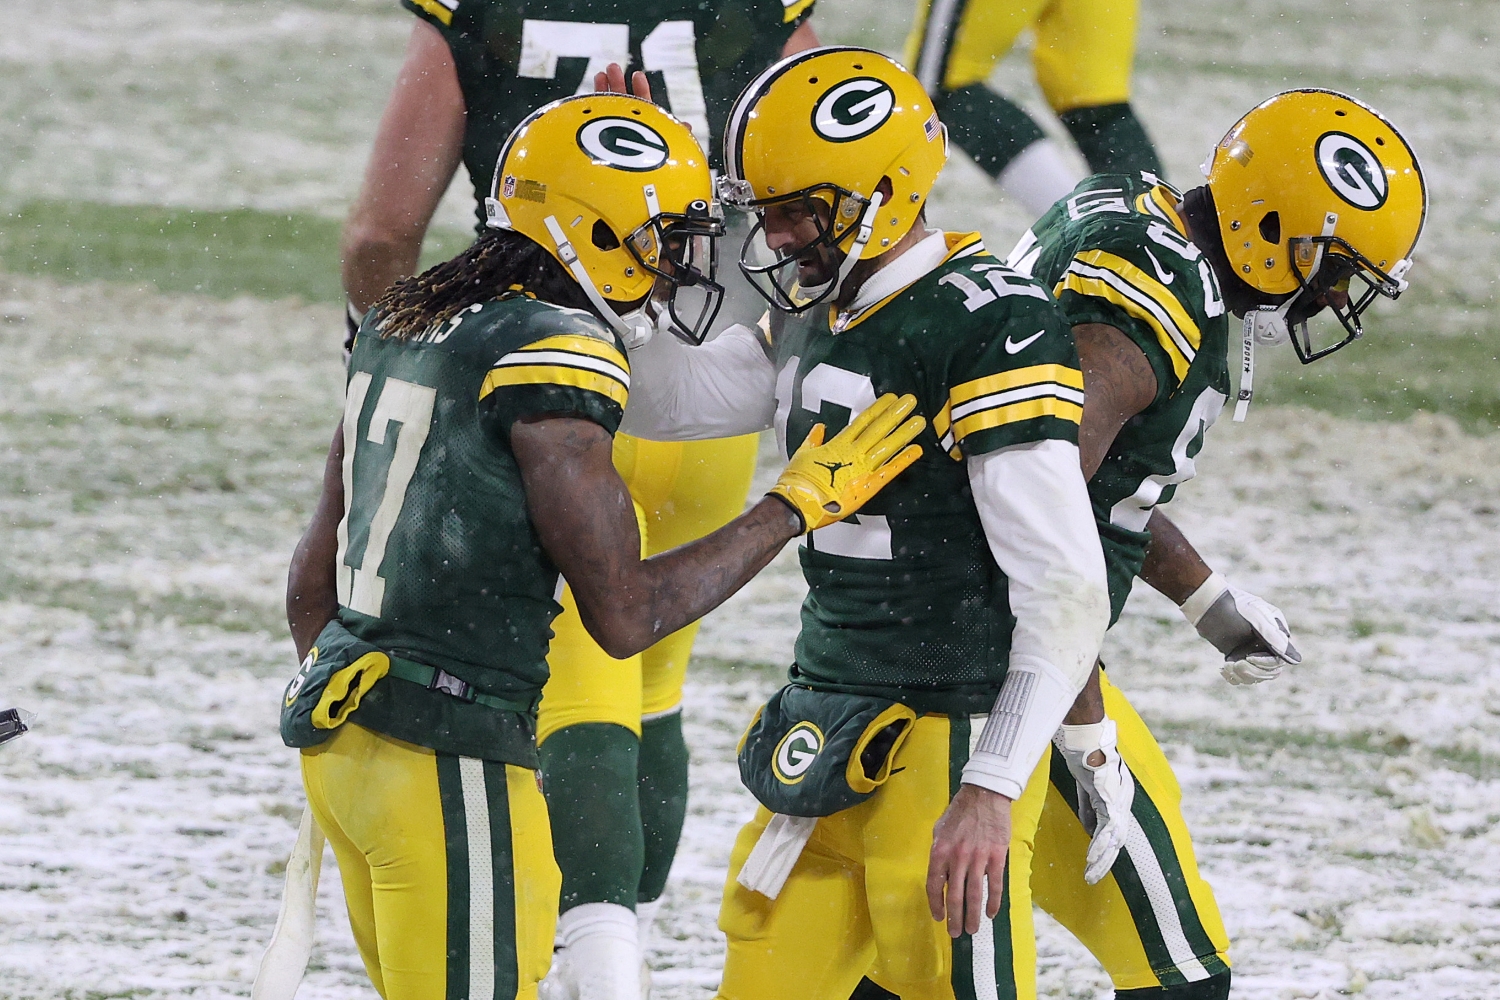 Green Bay Packers teammates Davante Adams and Aaron Rodgers celebrate scoring a touchdown.